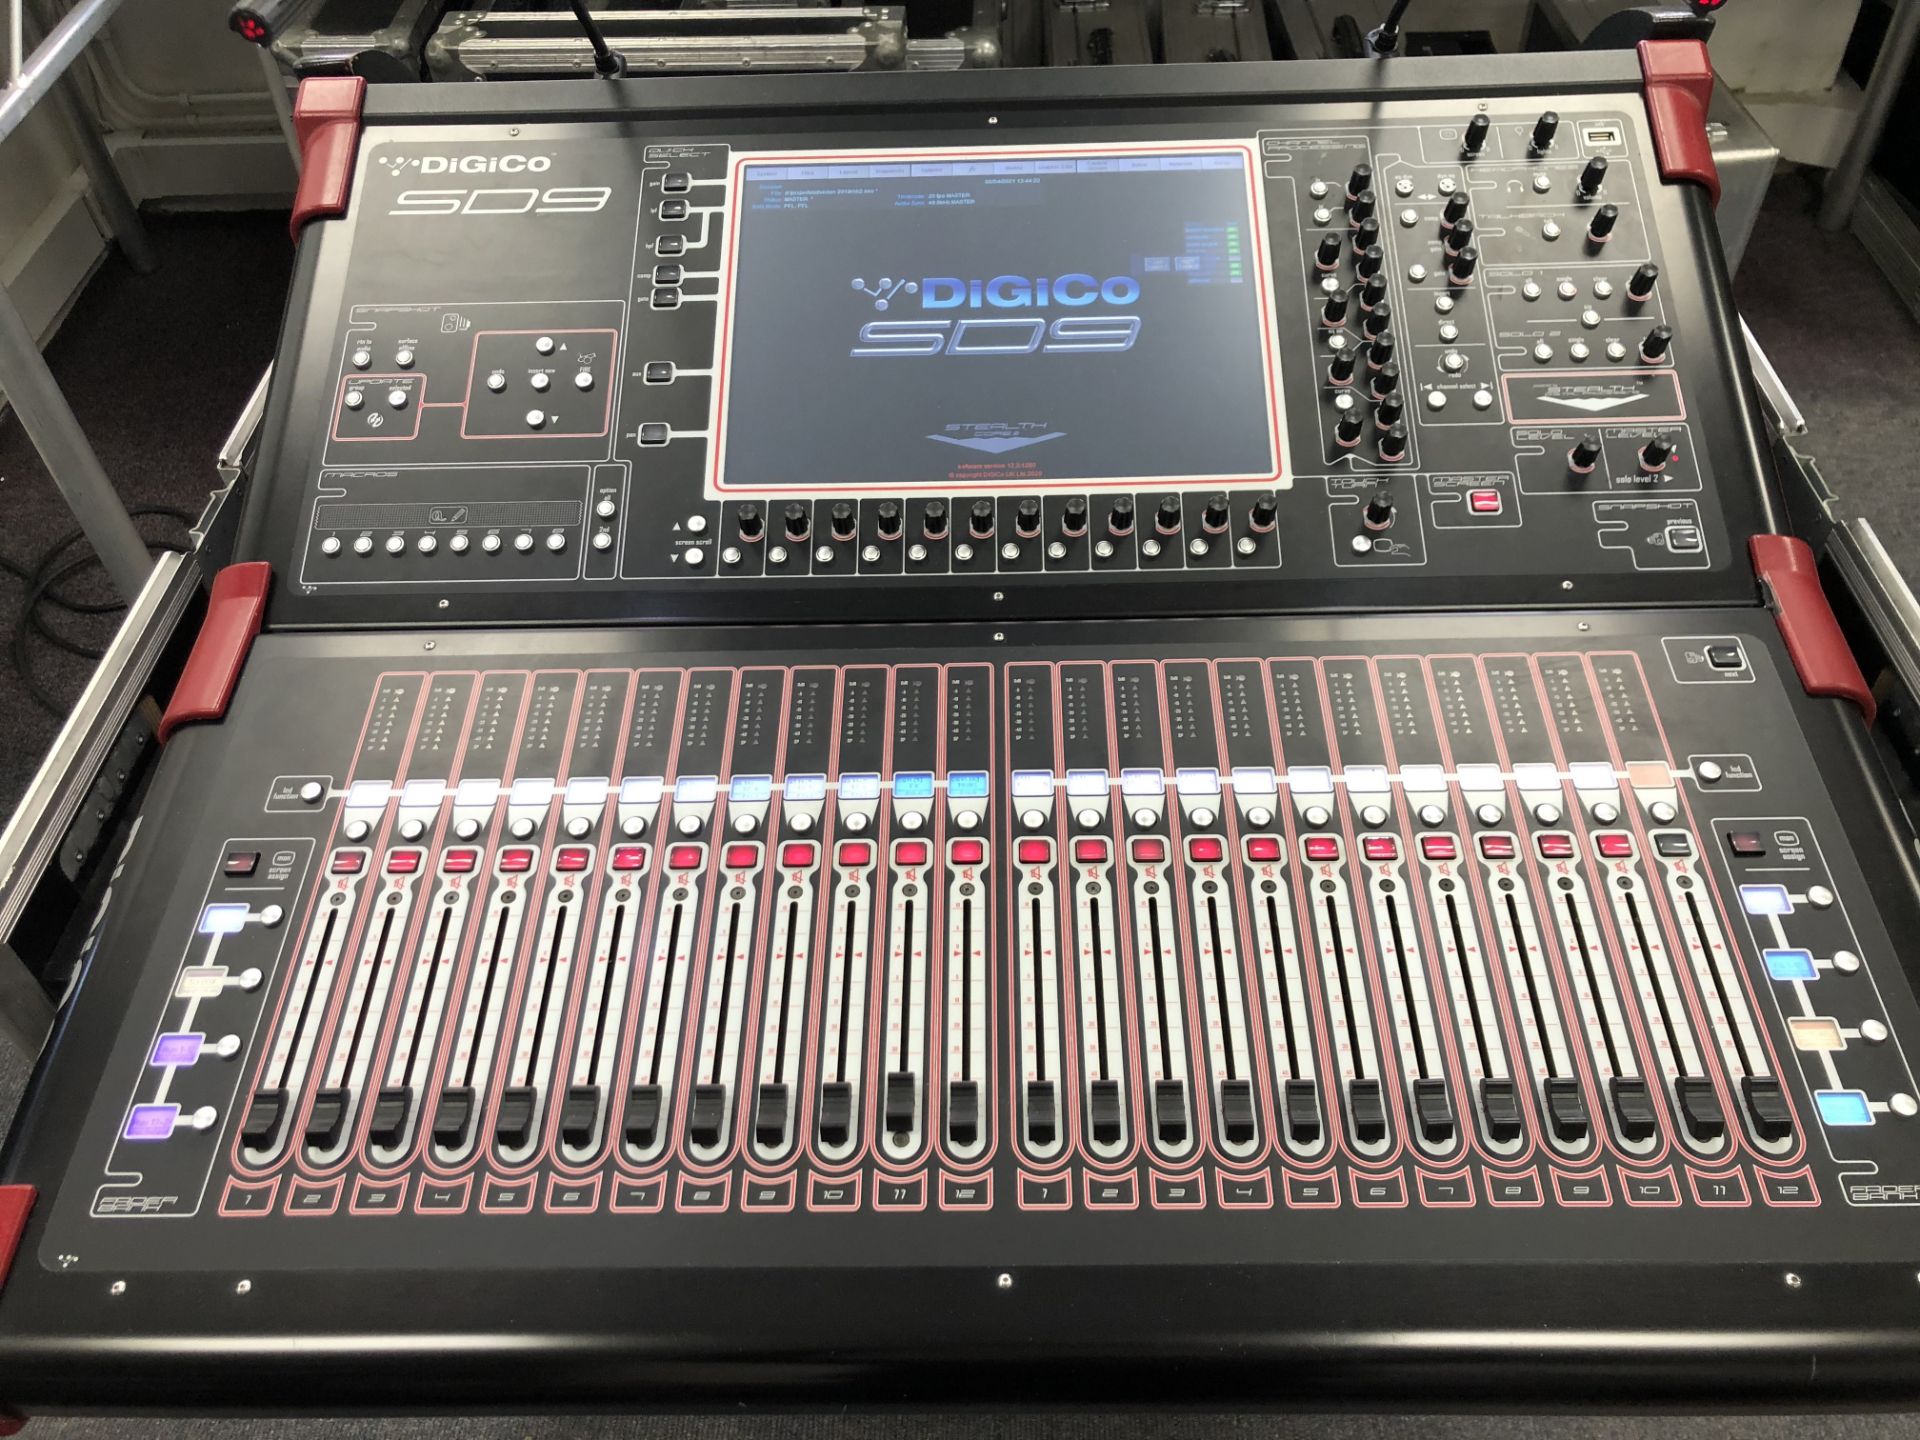 A Digico SD9 Sound Mixing Console, Core 2 Software with D-Rack 32 input, 16 output and 2 x 75m